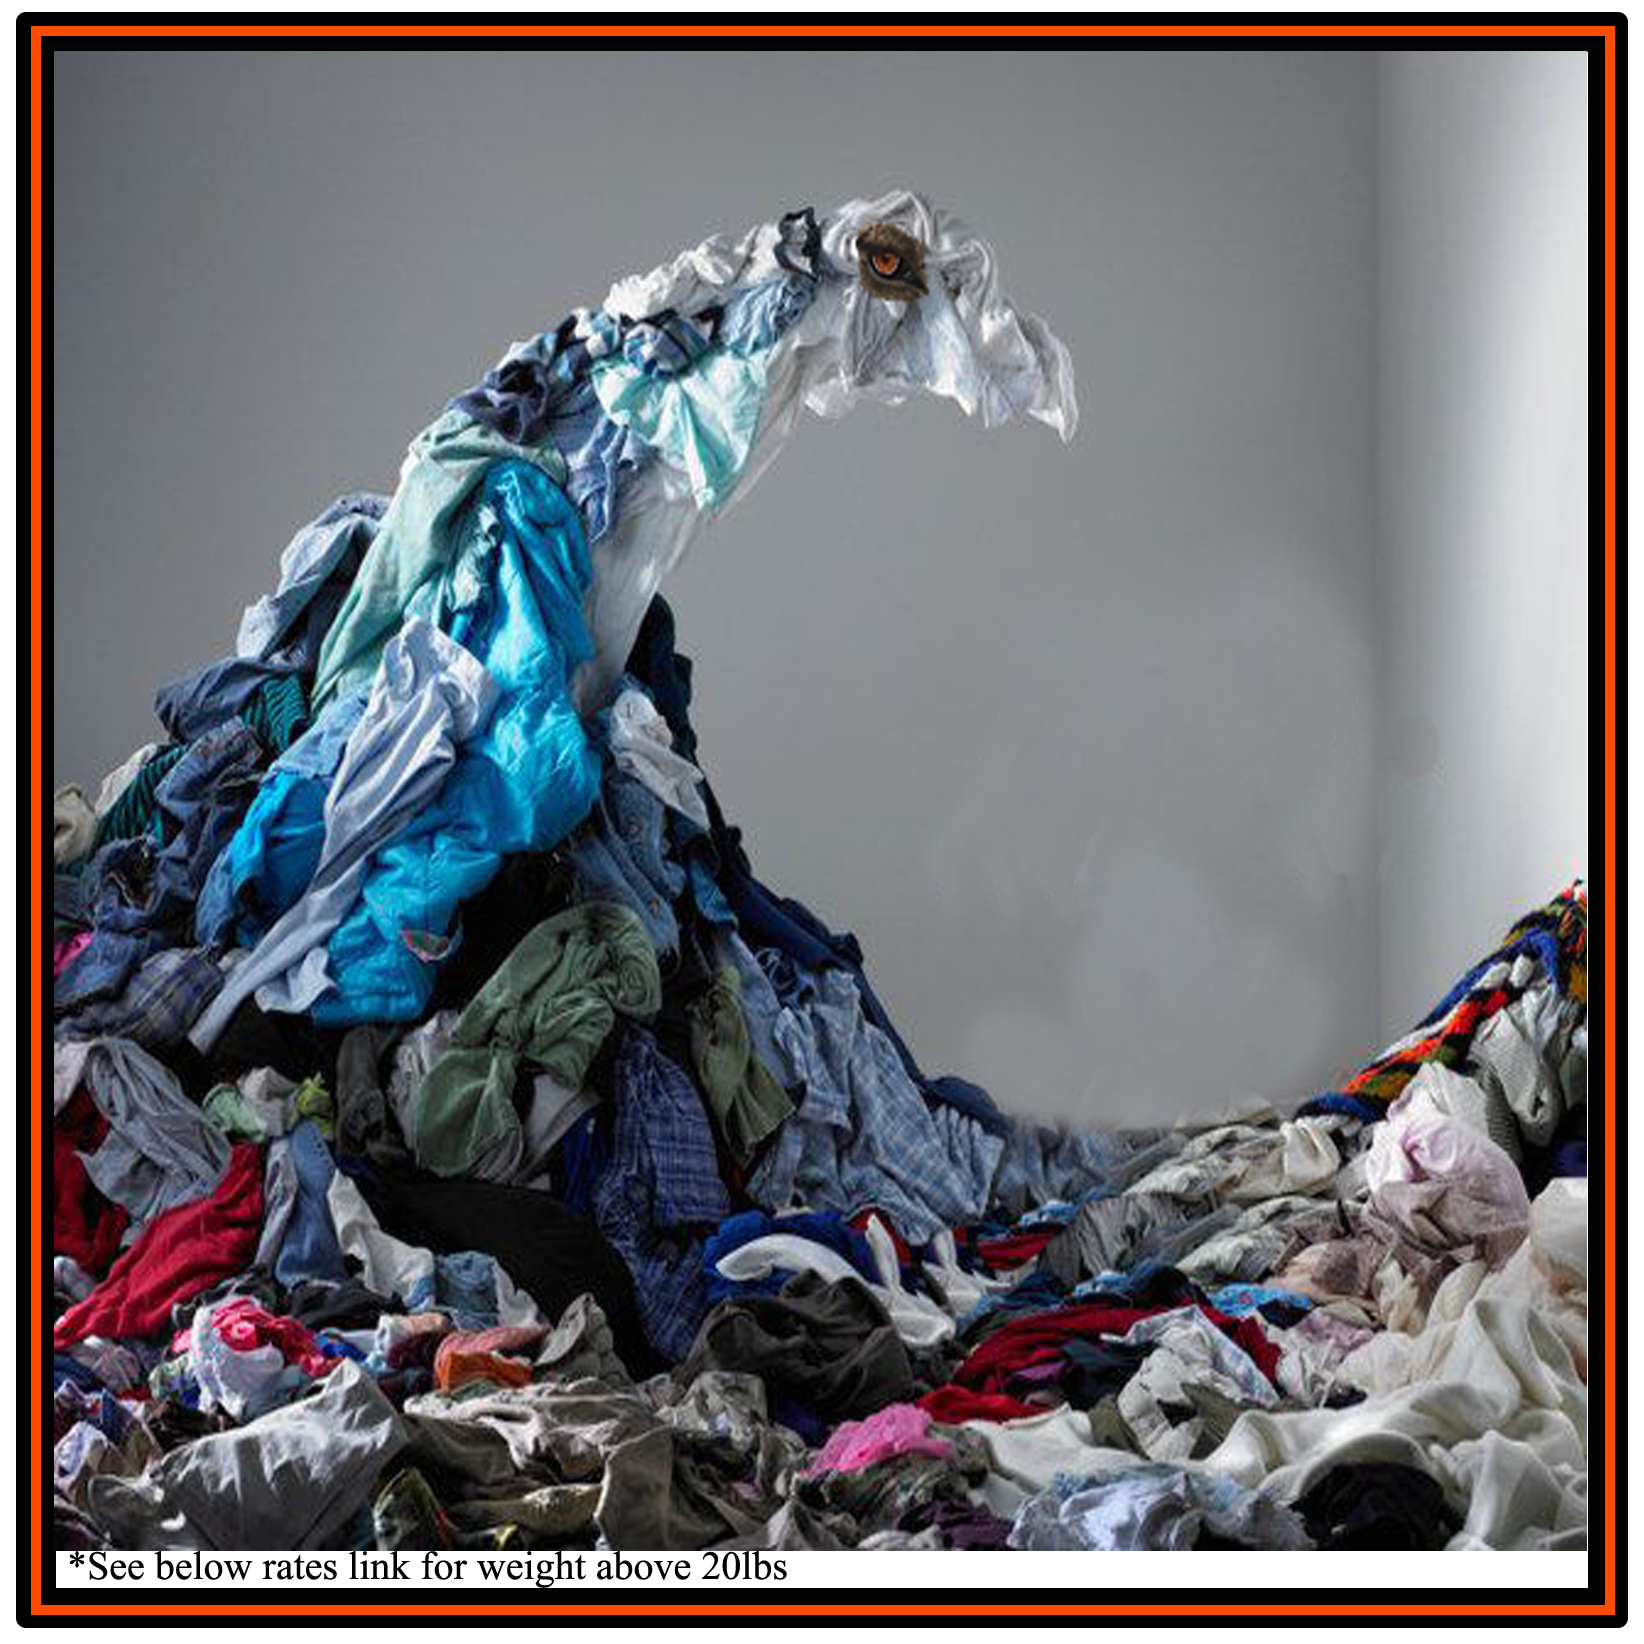 Residential Laundry Service, Laundry Pickup and Drop Off Service, Wash and Fold Service